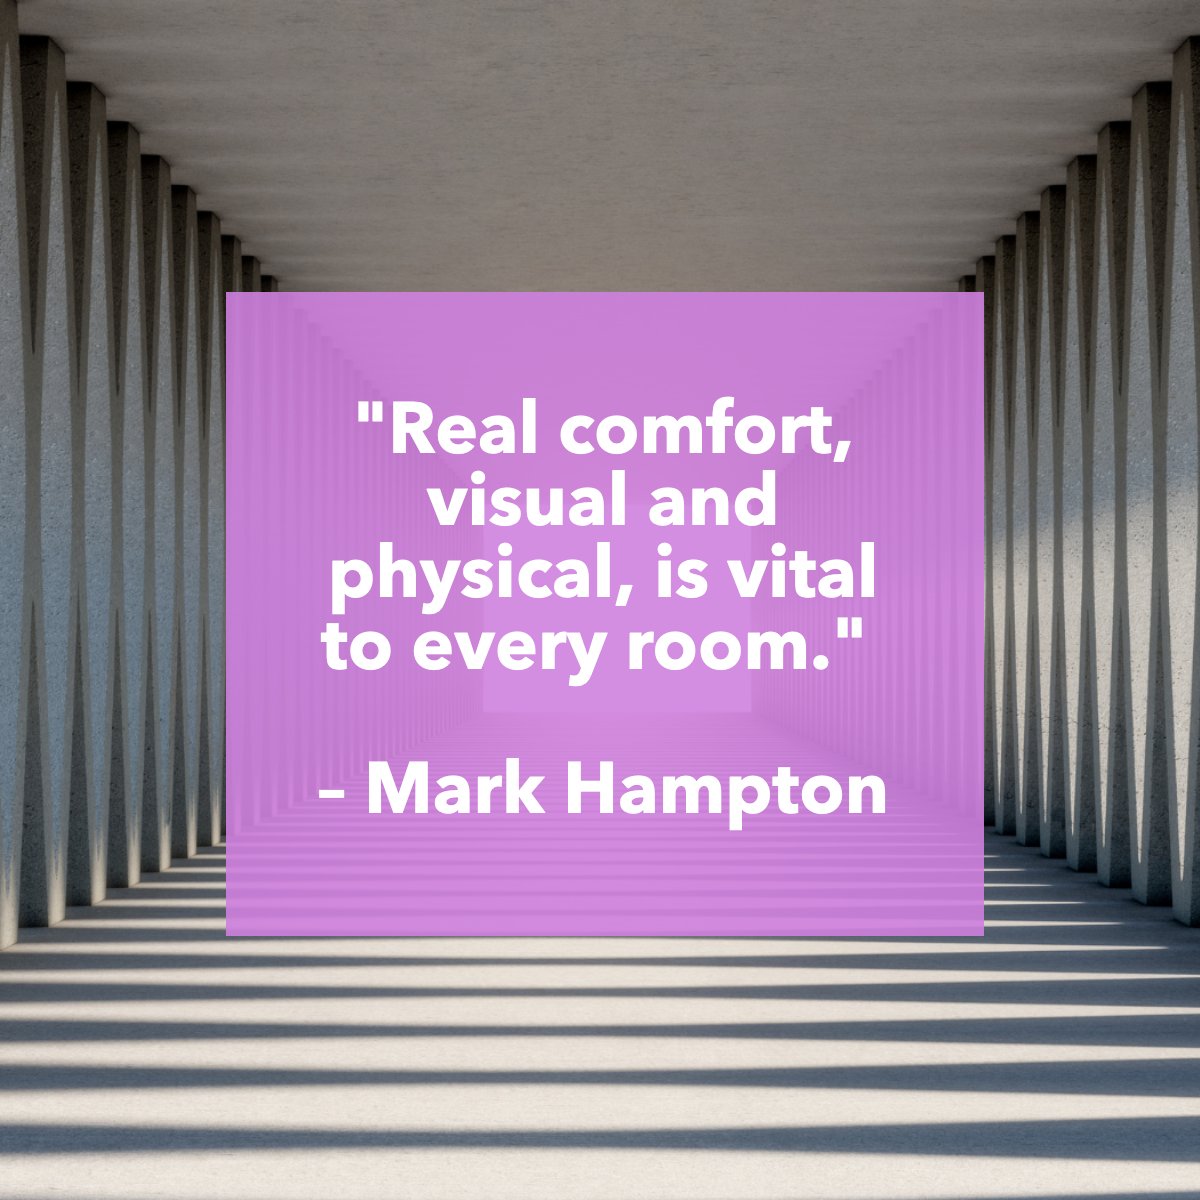 'Real comfort, visual and physical, is vital to every room.'
― Mark Hampton 📖

#quote #quoteoftheday #comfort #design #interiordesign #architecture 
 #MVPRealty #Jayneyardenrealtor #Gulfcoastrealestate #Tampabayrealestate #floridarealestateforsale #florida